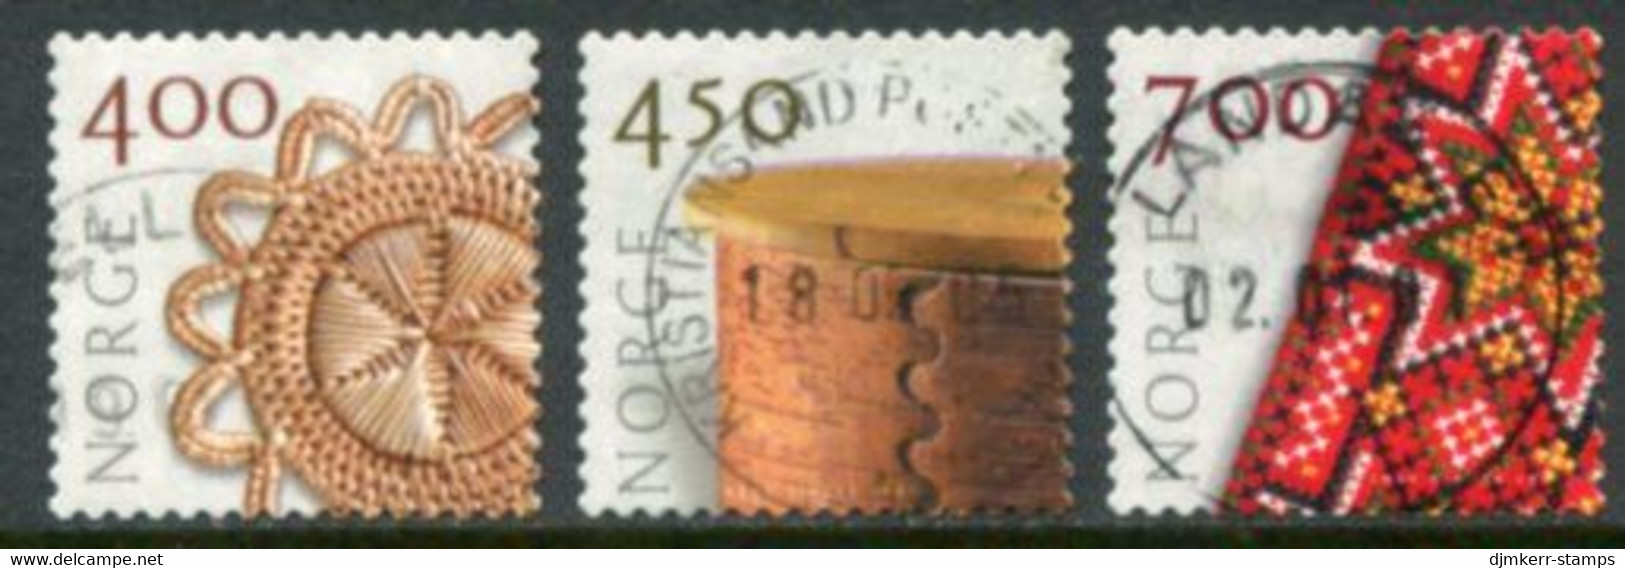 NORWAY 2001 Handicrafts Definitive Used.  Michel 1368-70 - Used Stamps